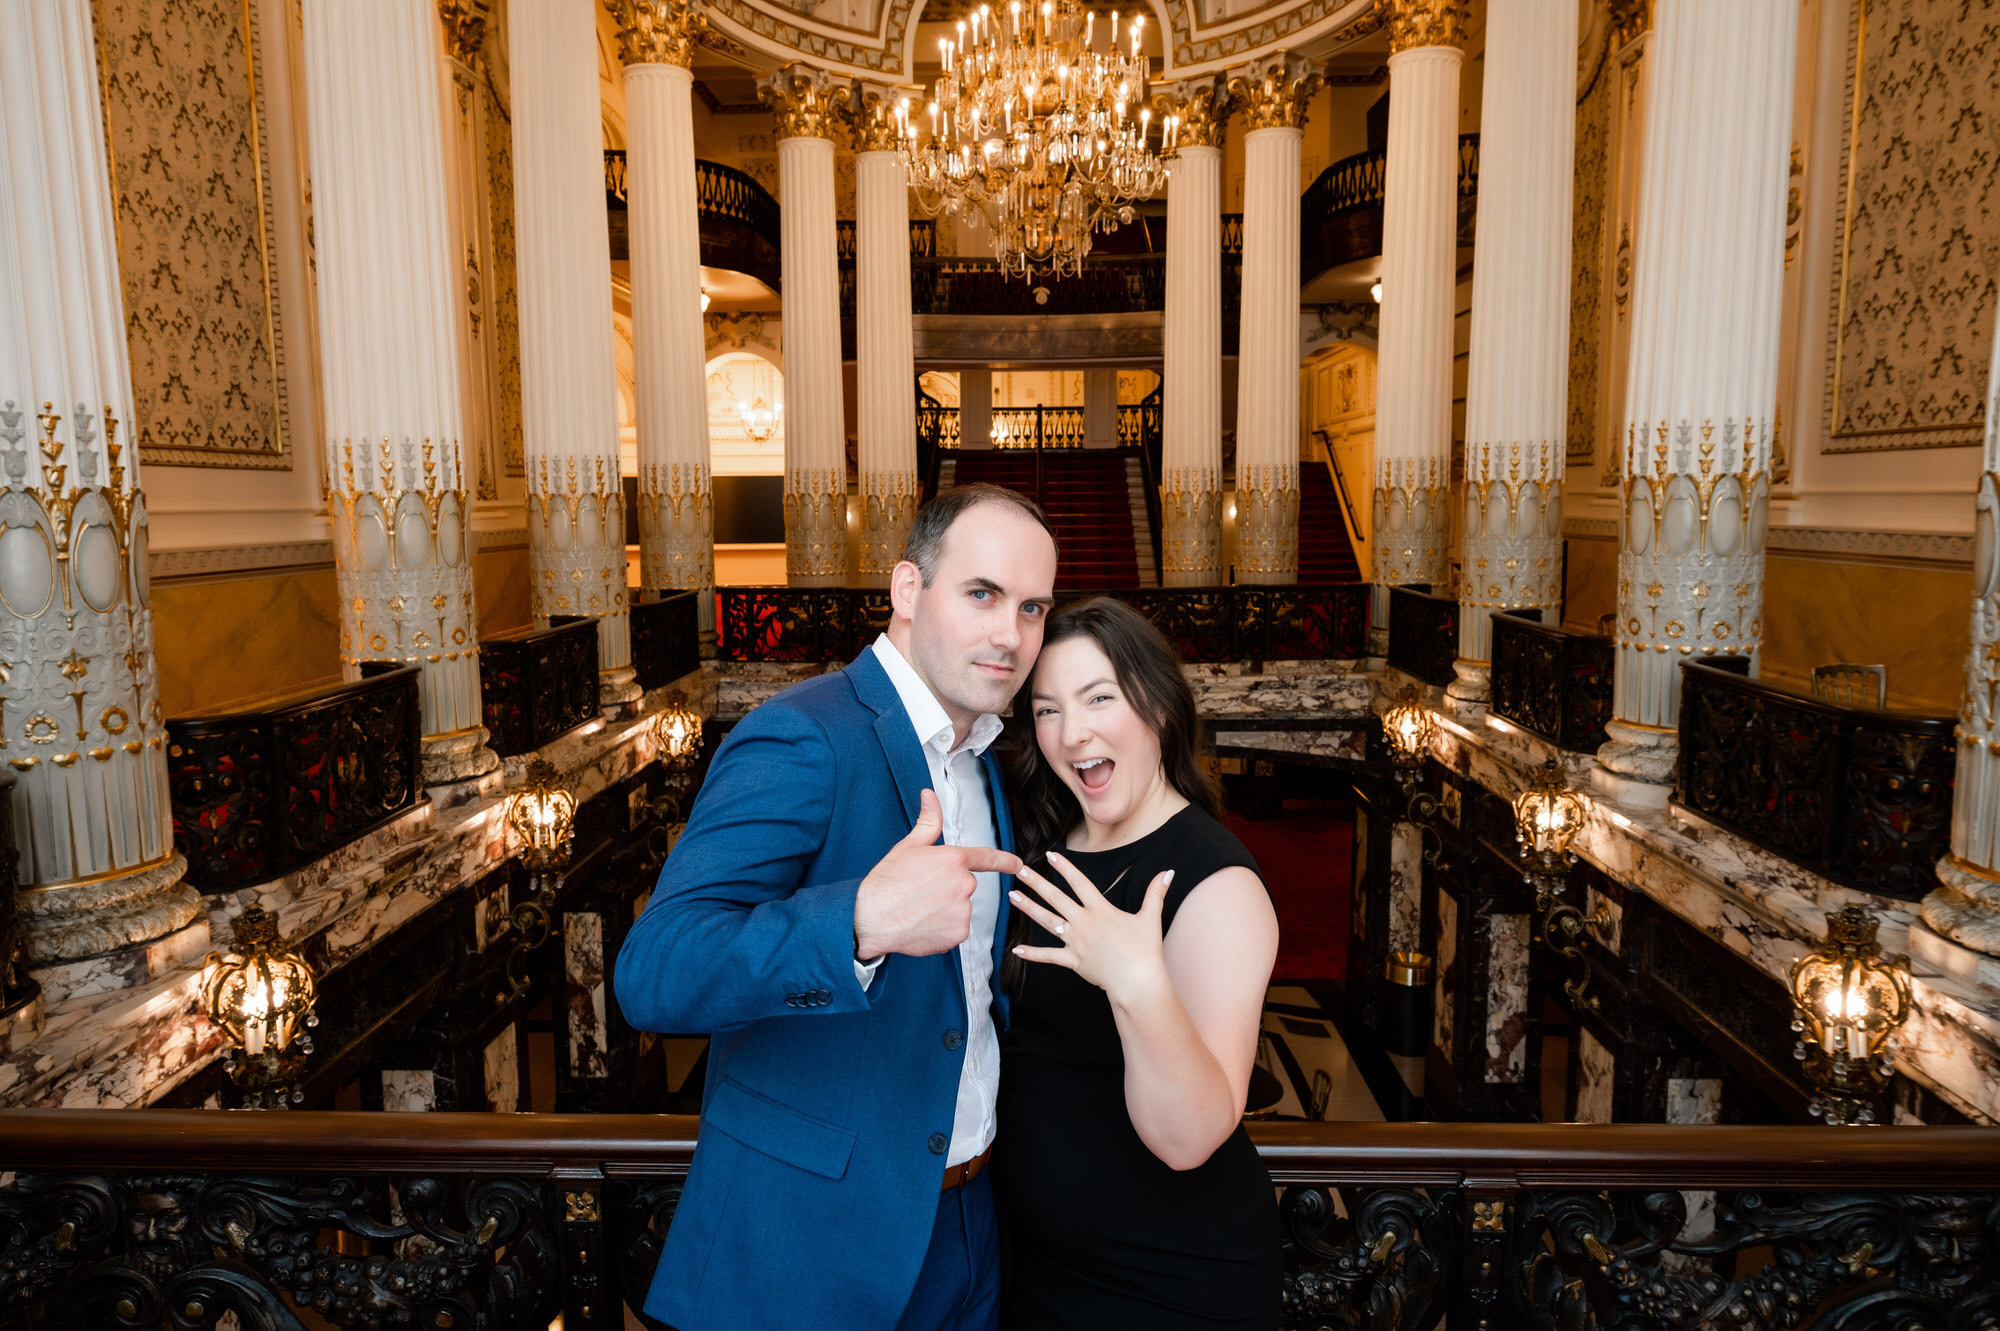 heinz hall engagement proposal • Pittsburgh Surprise Proposal Photography | Engagement